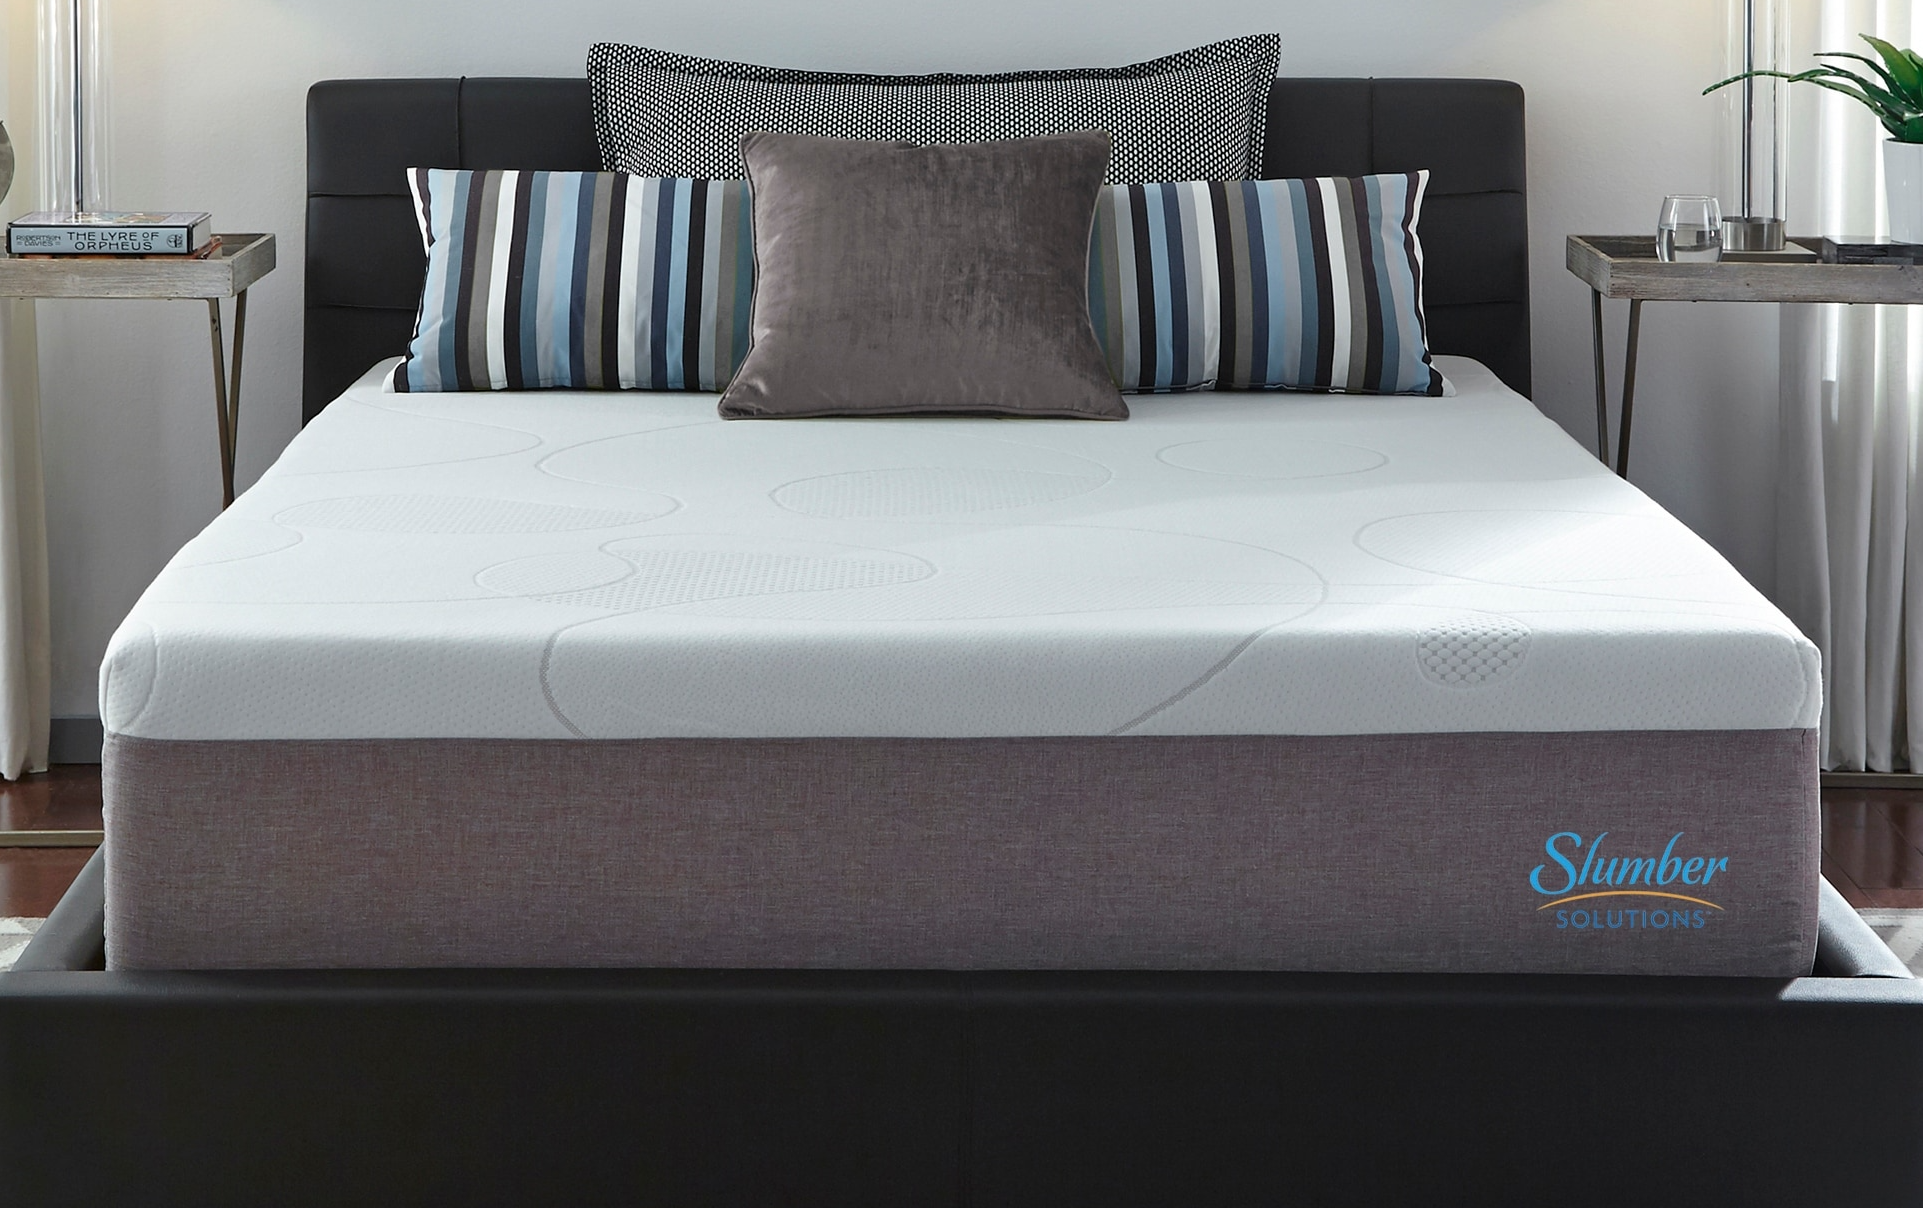 A mattress sitting on a bed frame. There are pillows on top of the mattress. 